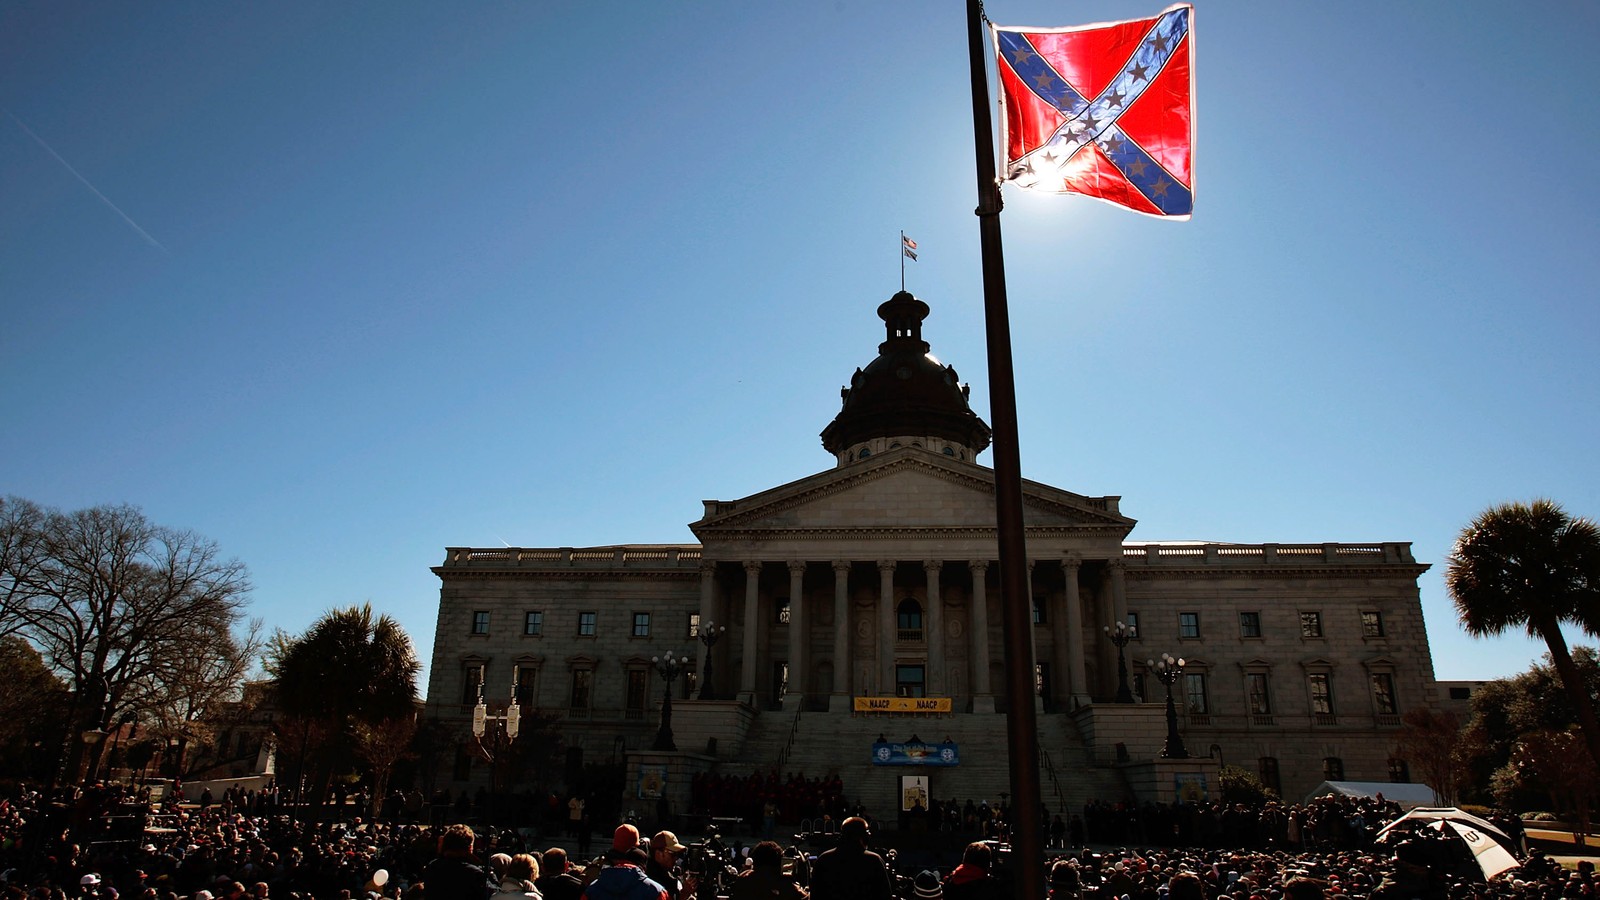 Why is the Confederate flag so offensive?